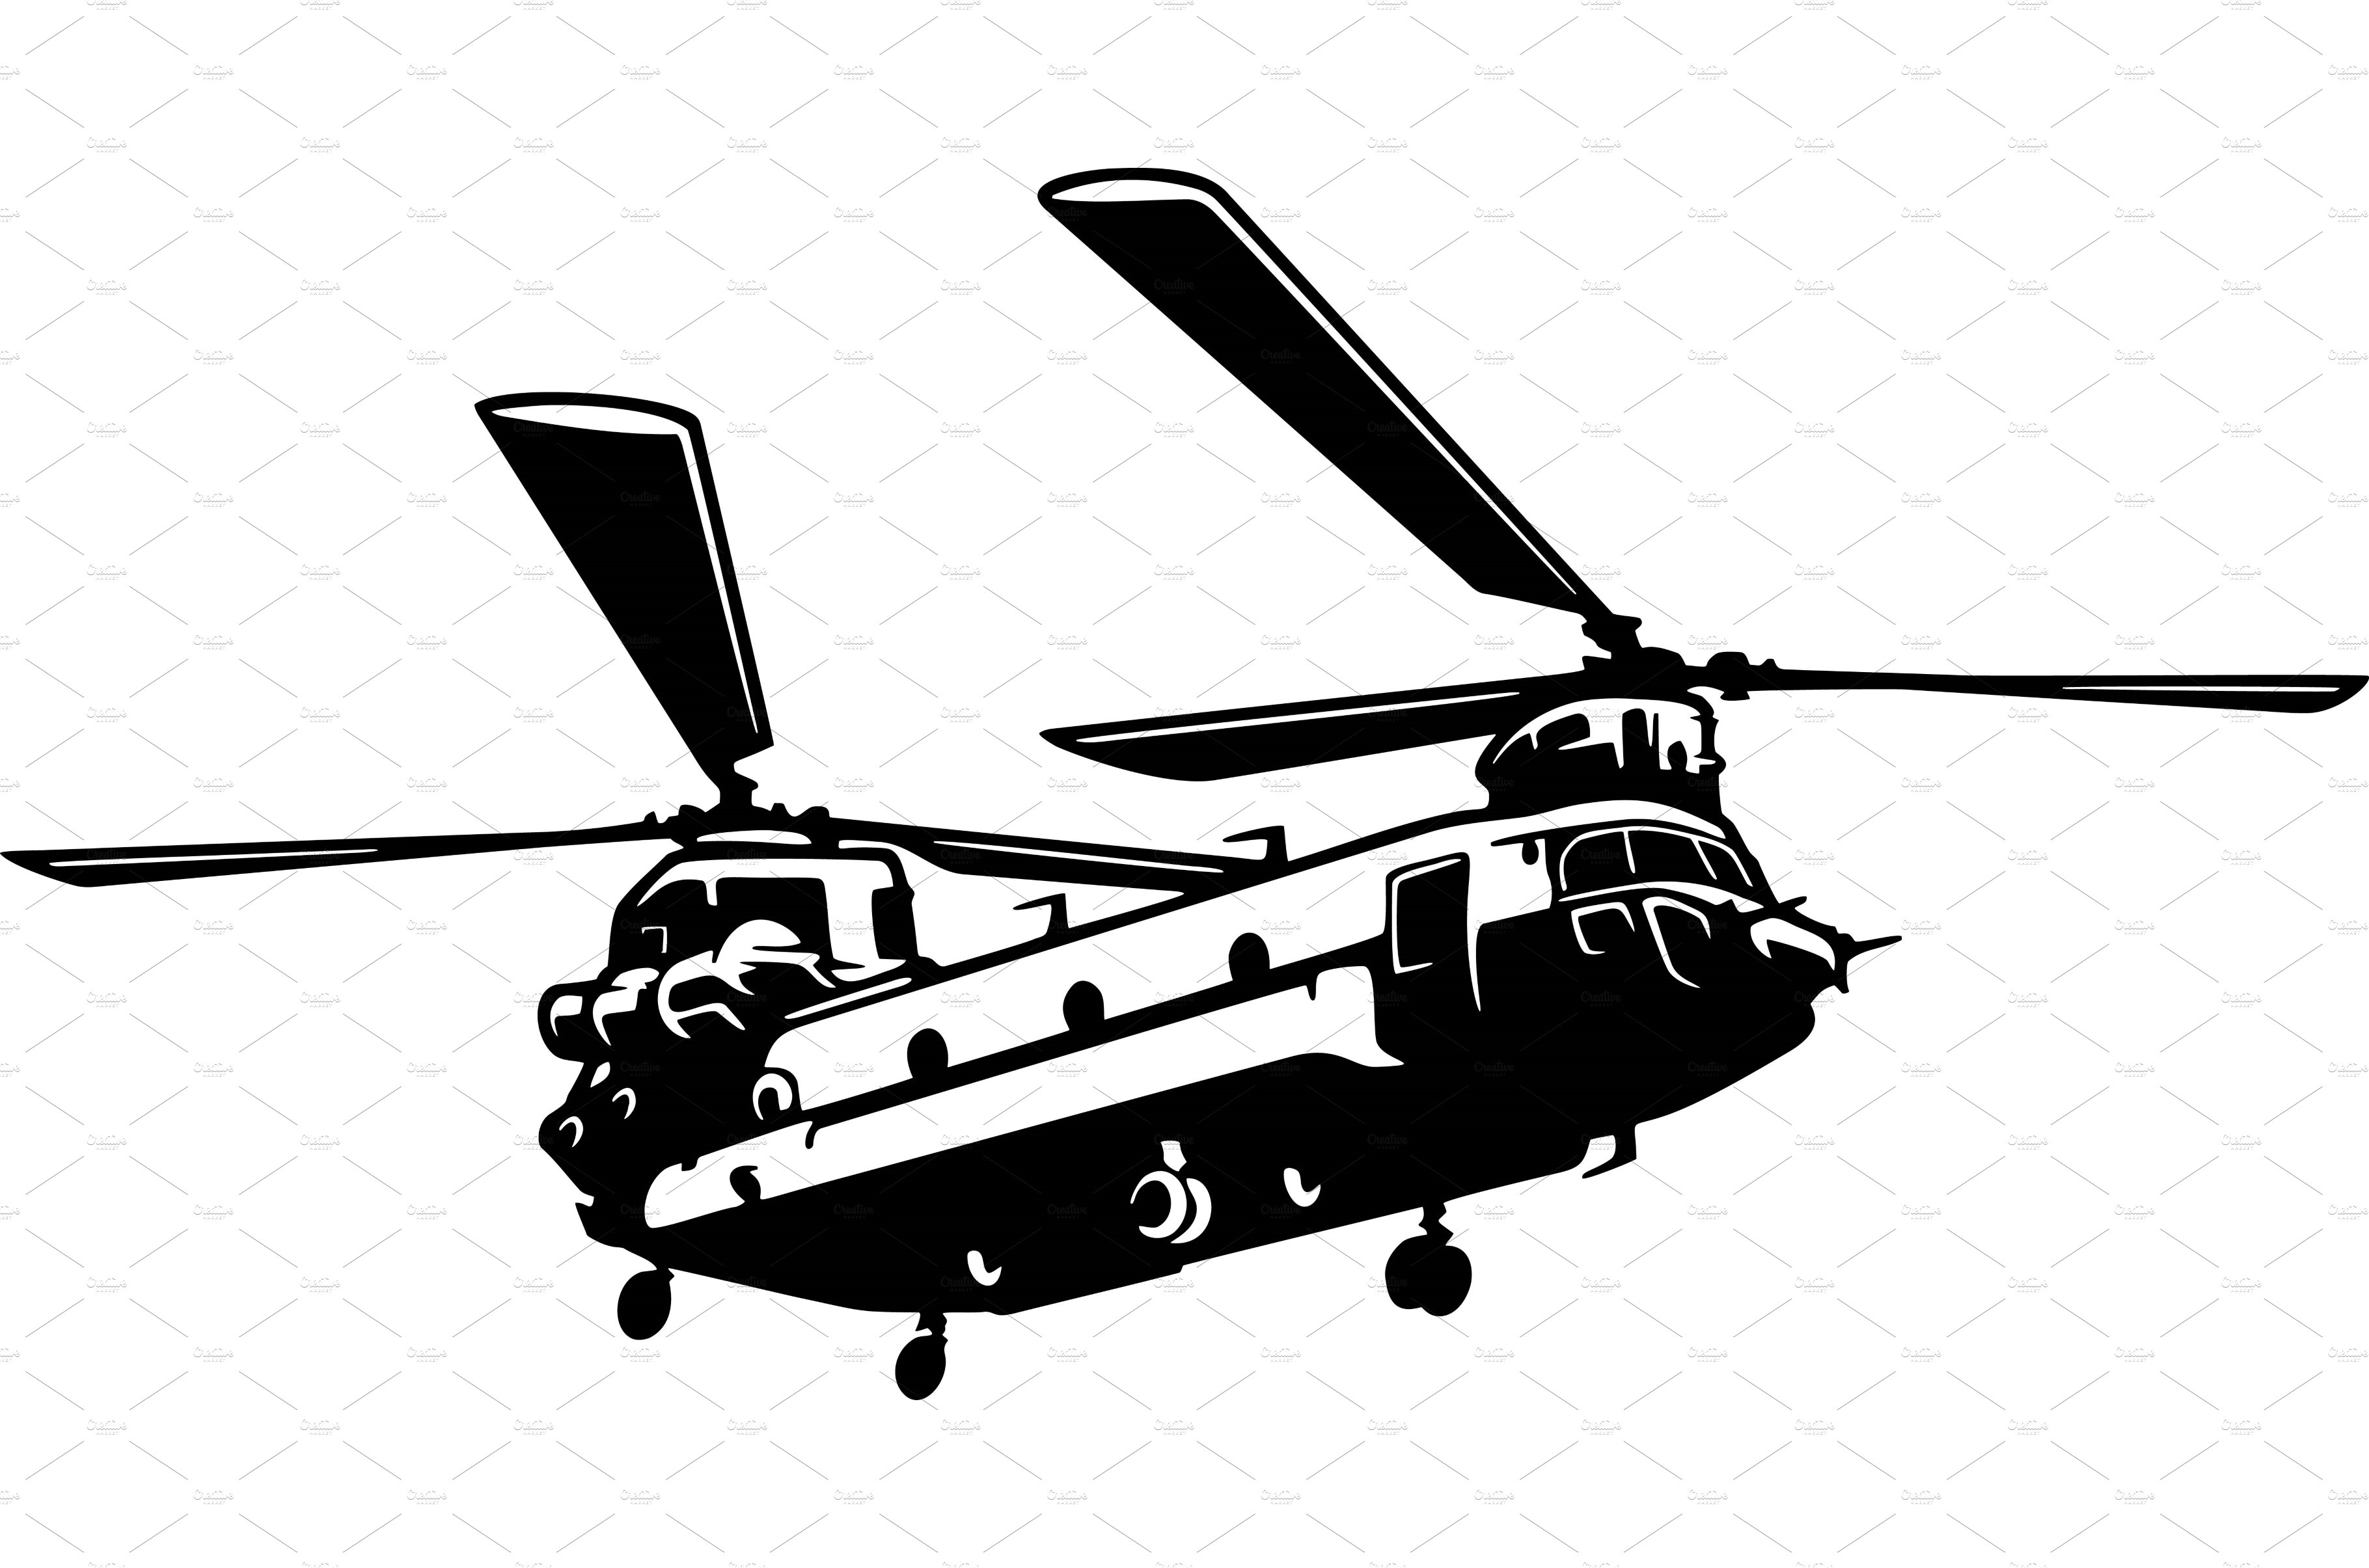 army helicopter clipart